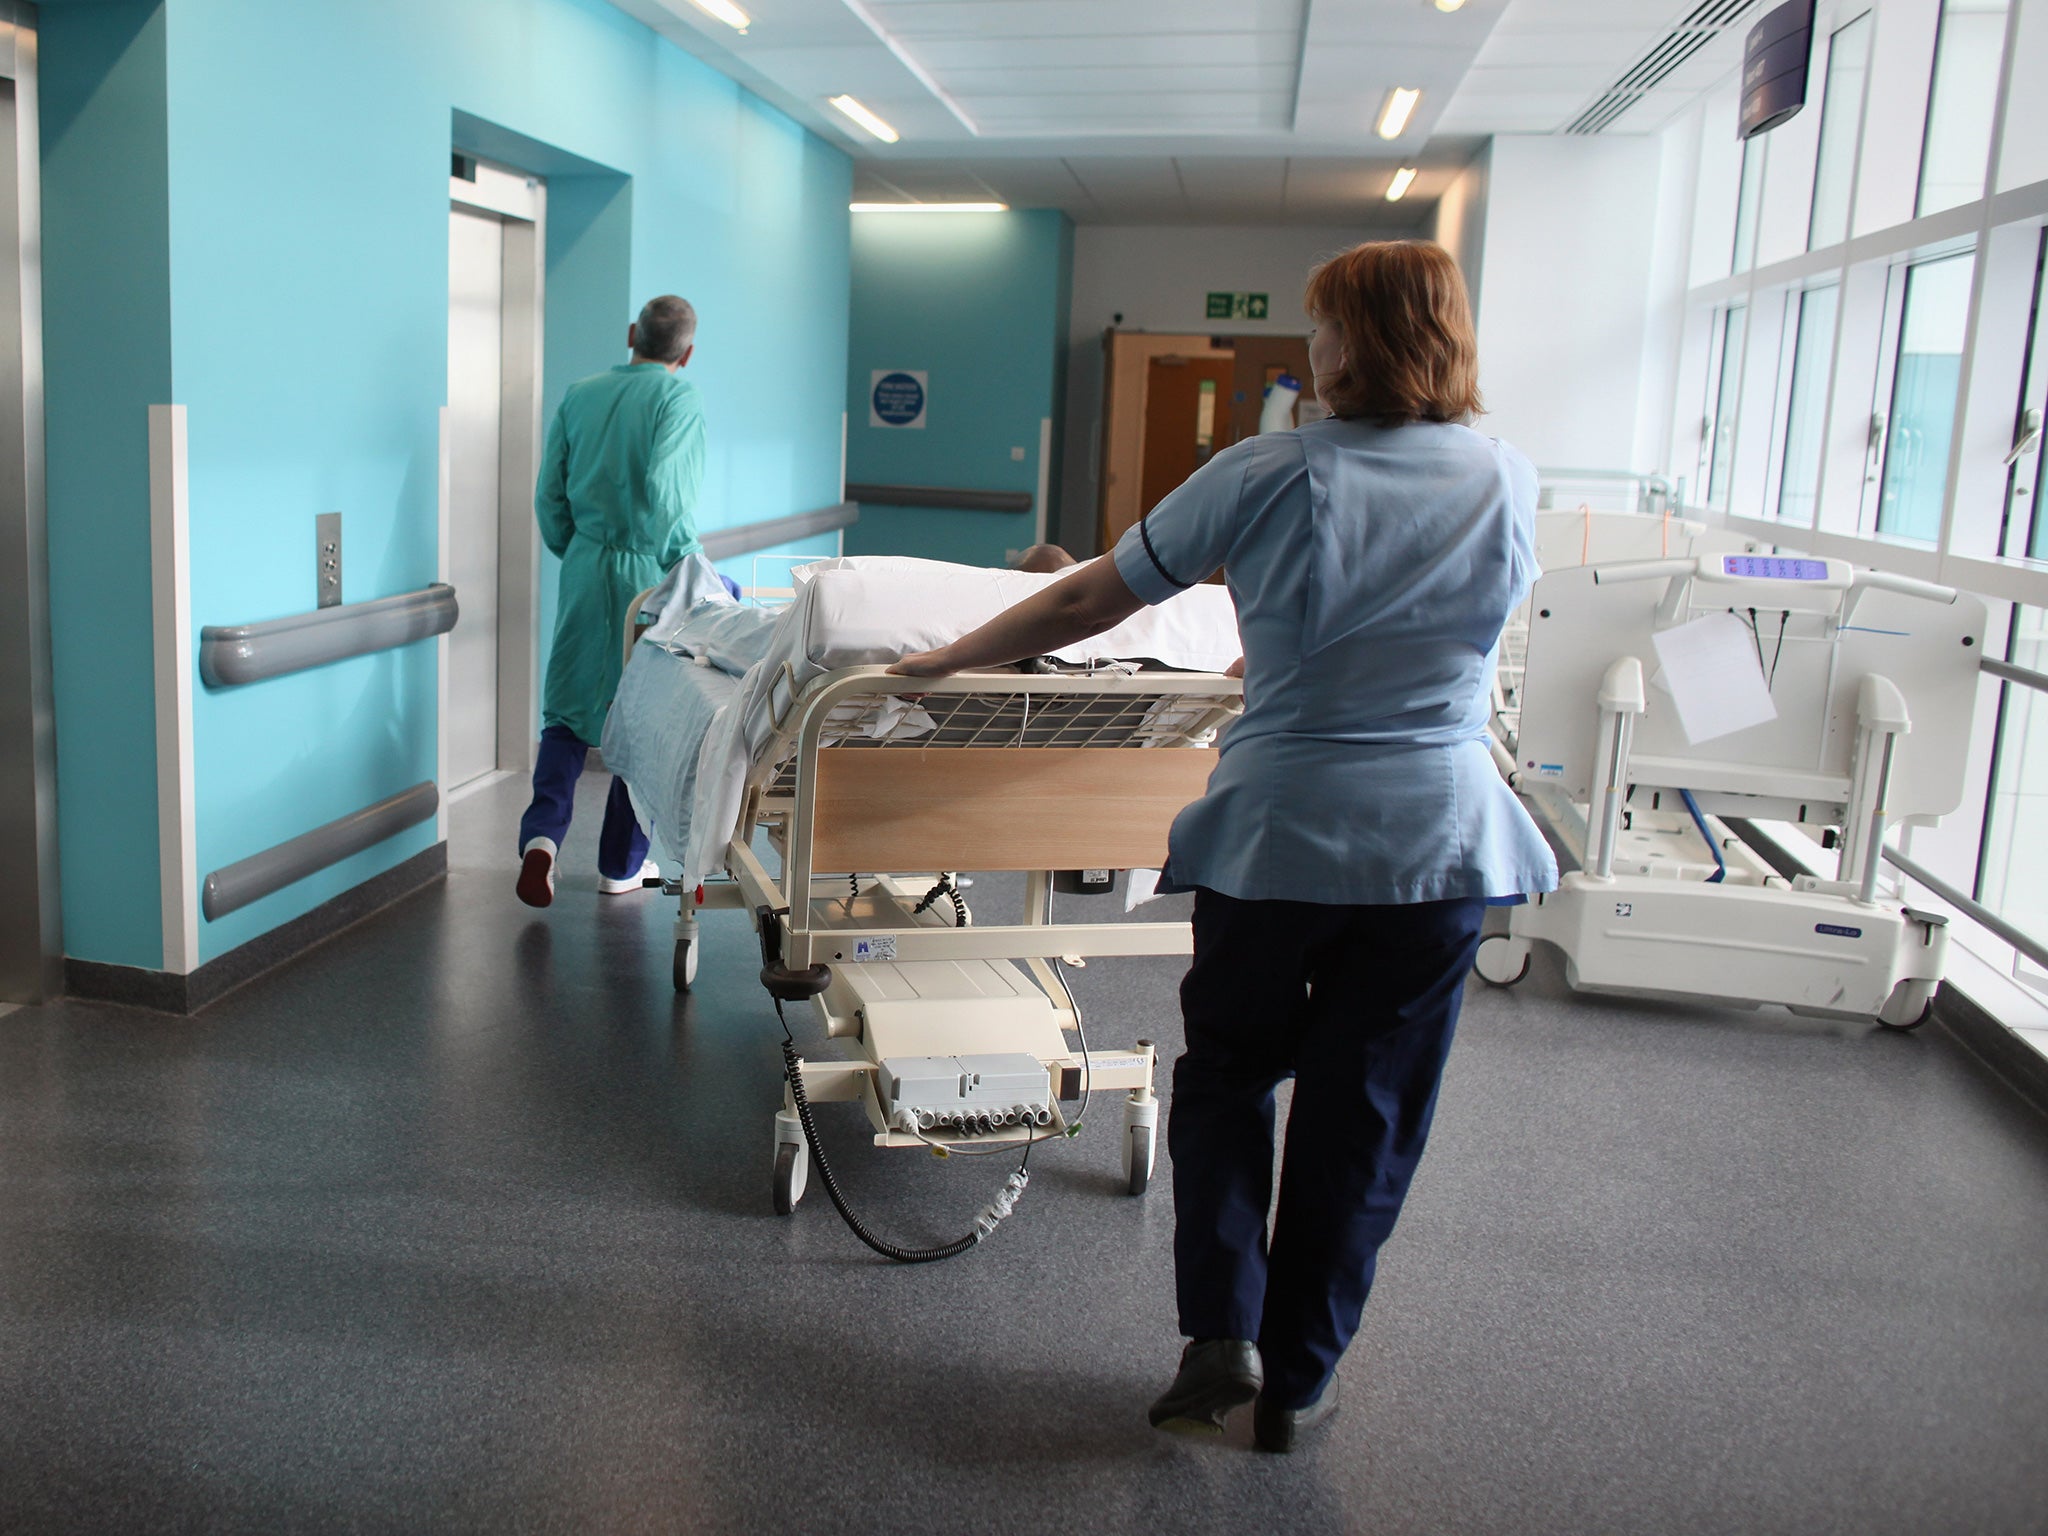 The NHS is facing a £30bn annual gap in funding by 2020-21